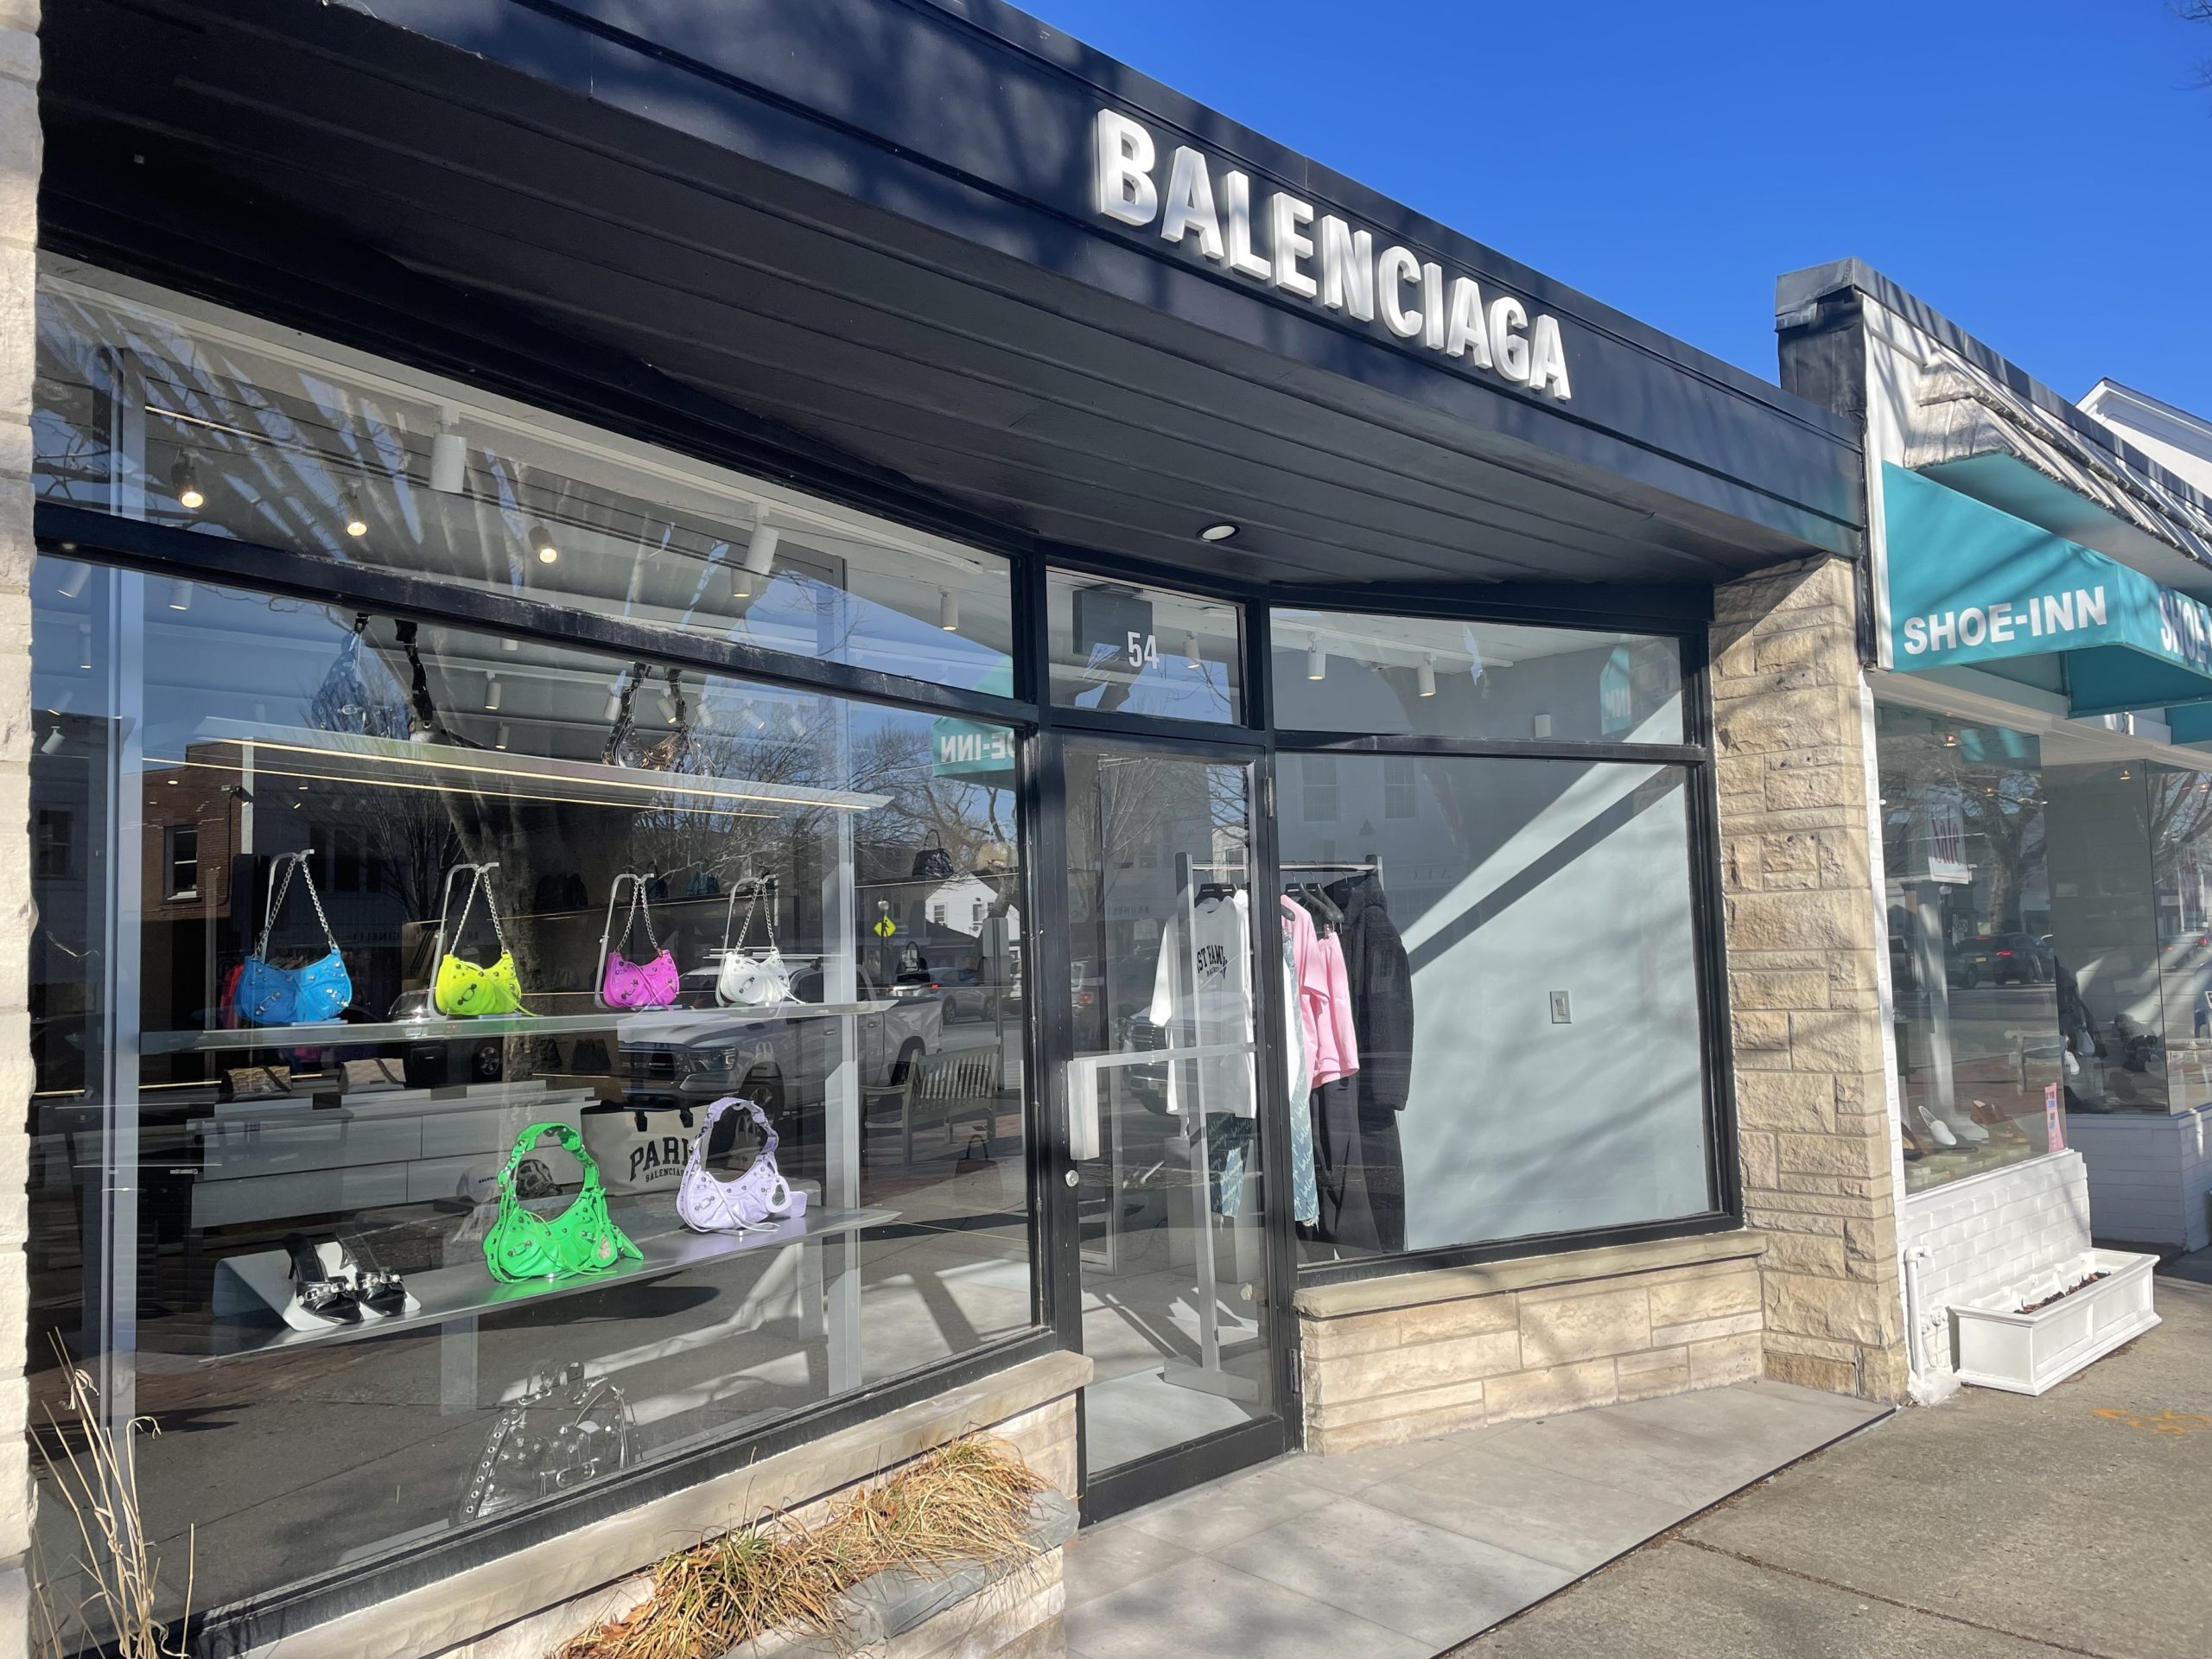 The Balenciaga store on Newtown Lane in East Hampton Village was the victim of a style of theft that has previously been common only in big cities with high-end stores. Four thieves stormed into the store on Thursday and grabbed more than $95,000 worth of handbags in less than a minute.